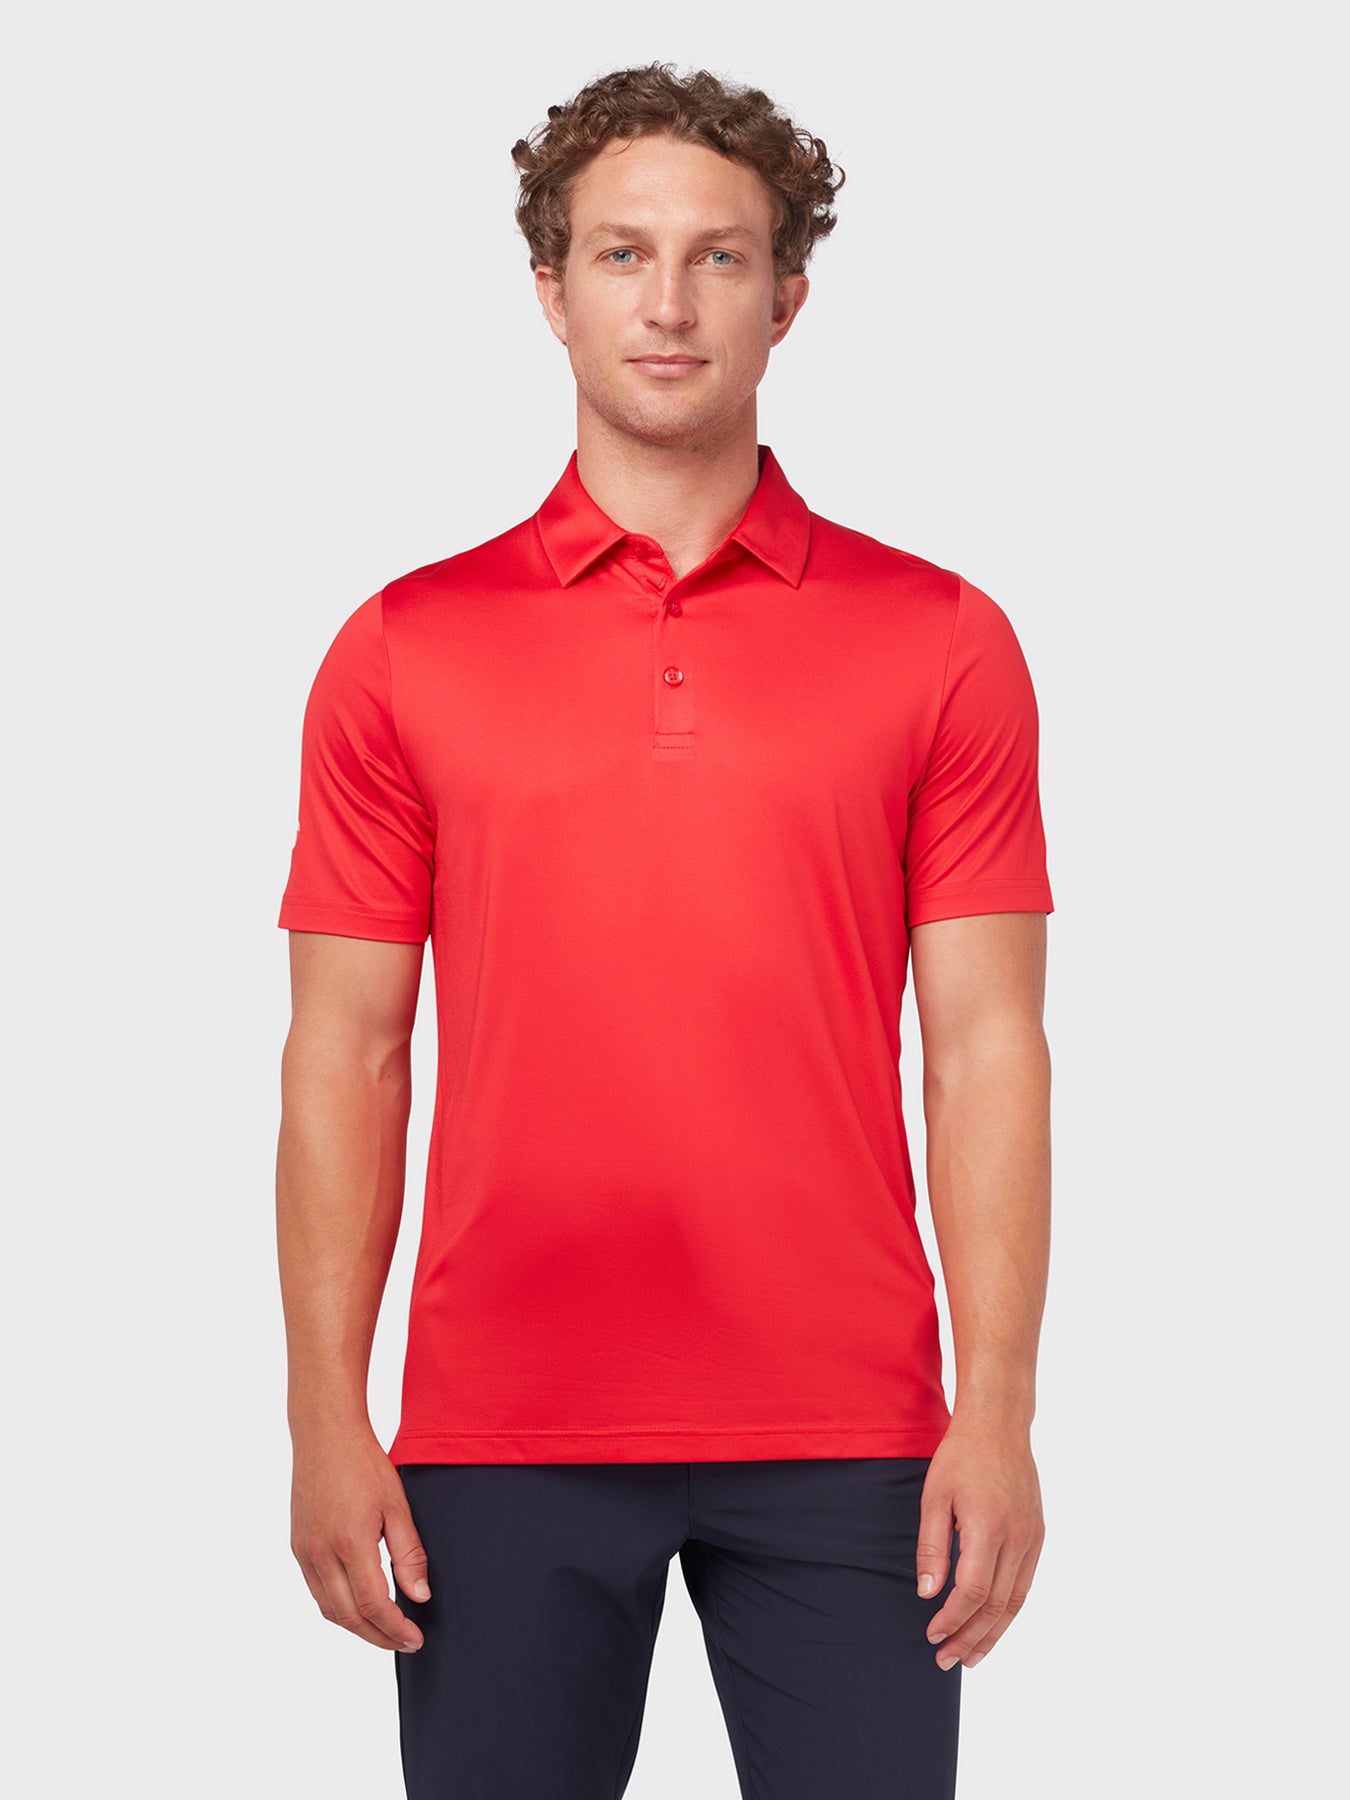 View Swing Tech Tour Polo In True Red information